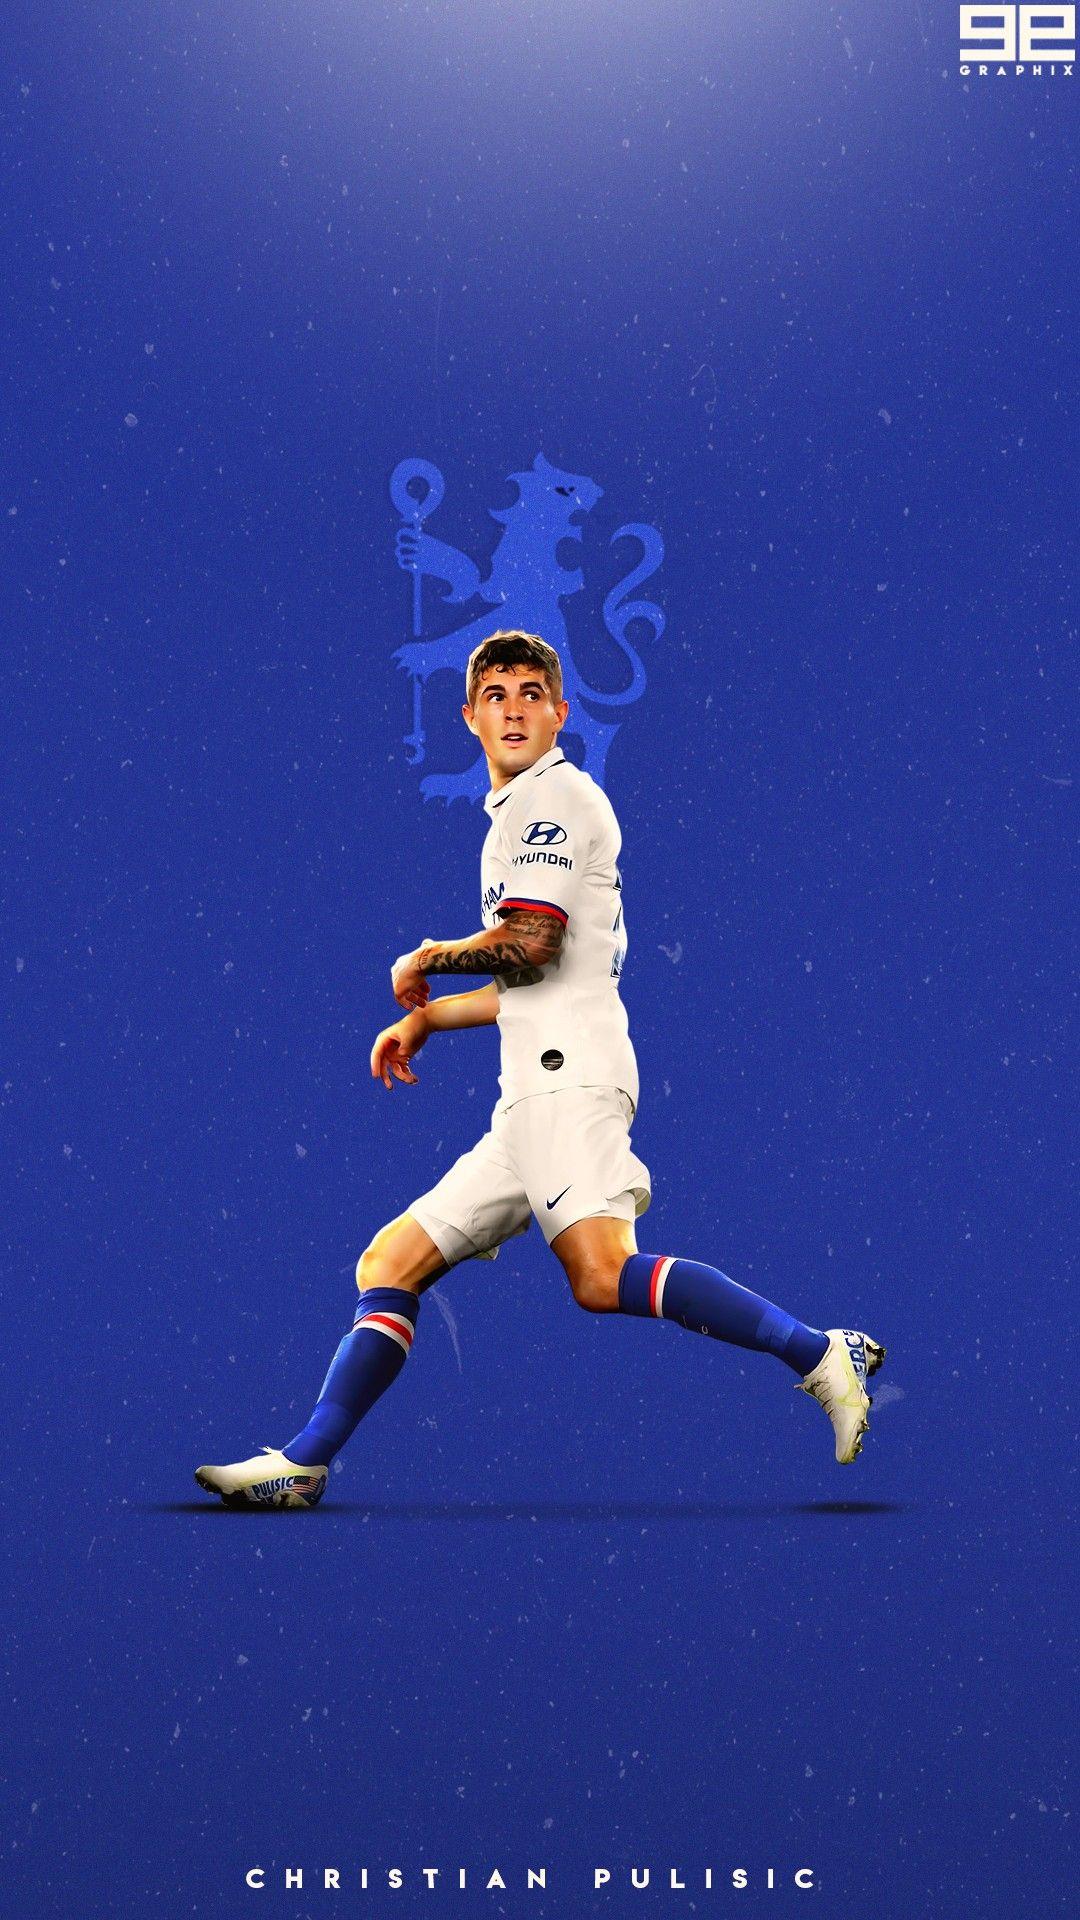 christian pulisic wallpaper by Aslam785  Download on ZEDGE  f21e